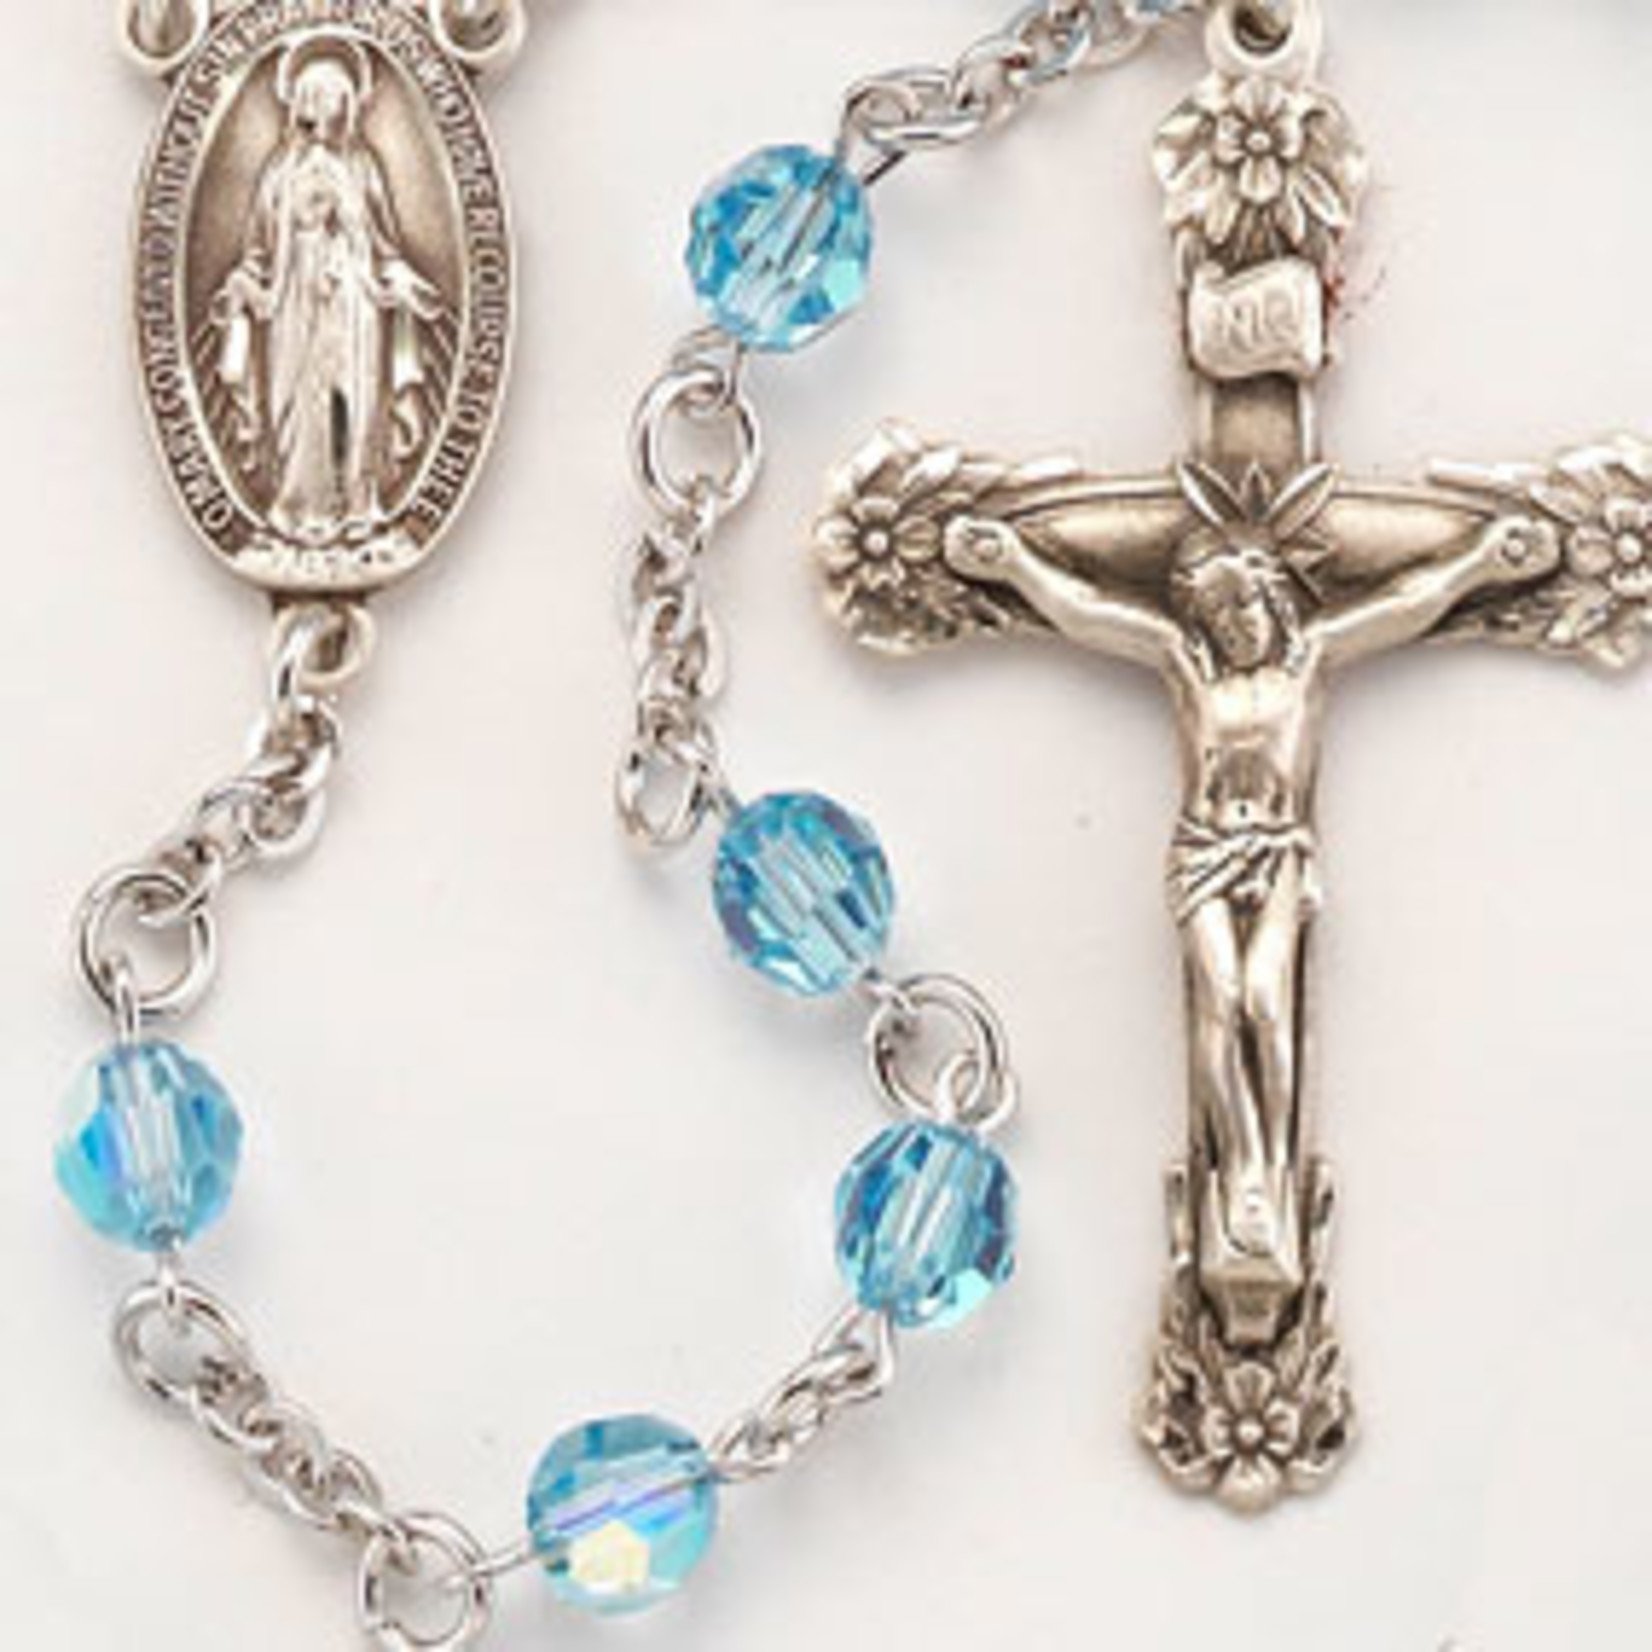 Aqua Austrian Crystal And Sterling Silver Rosary